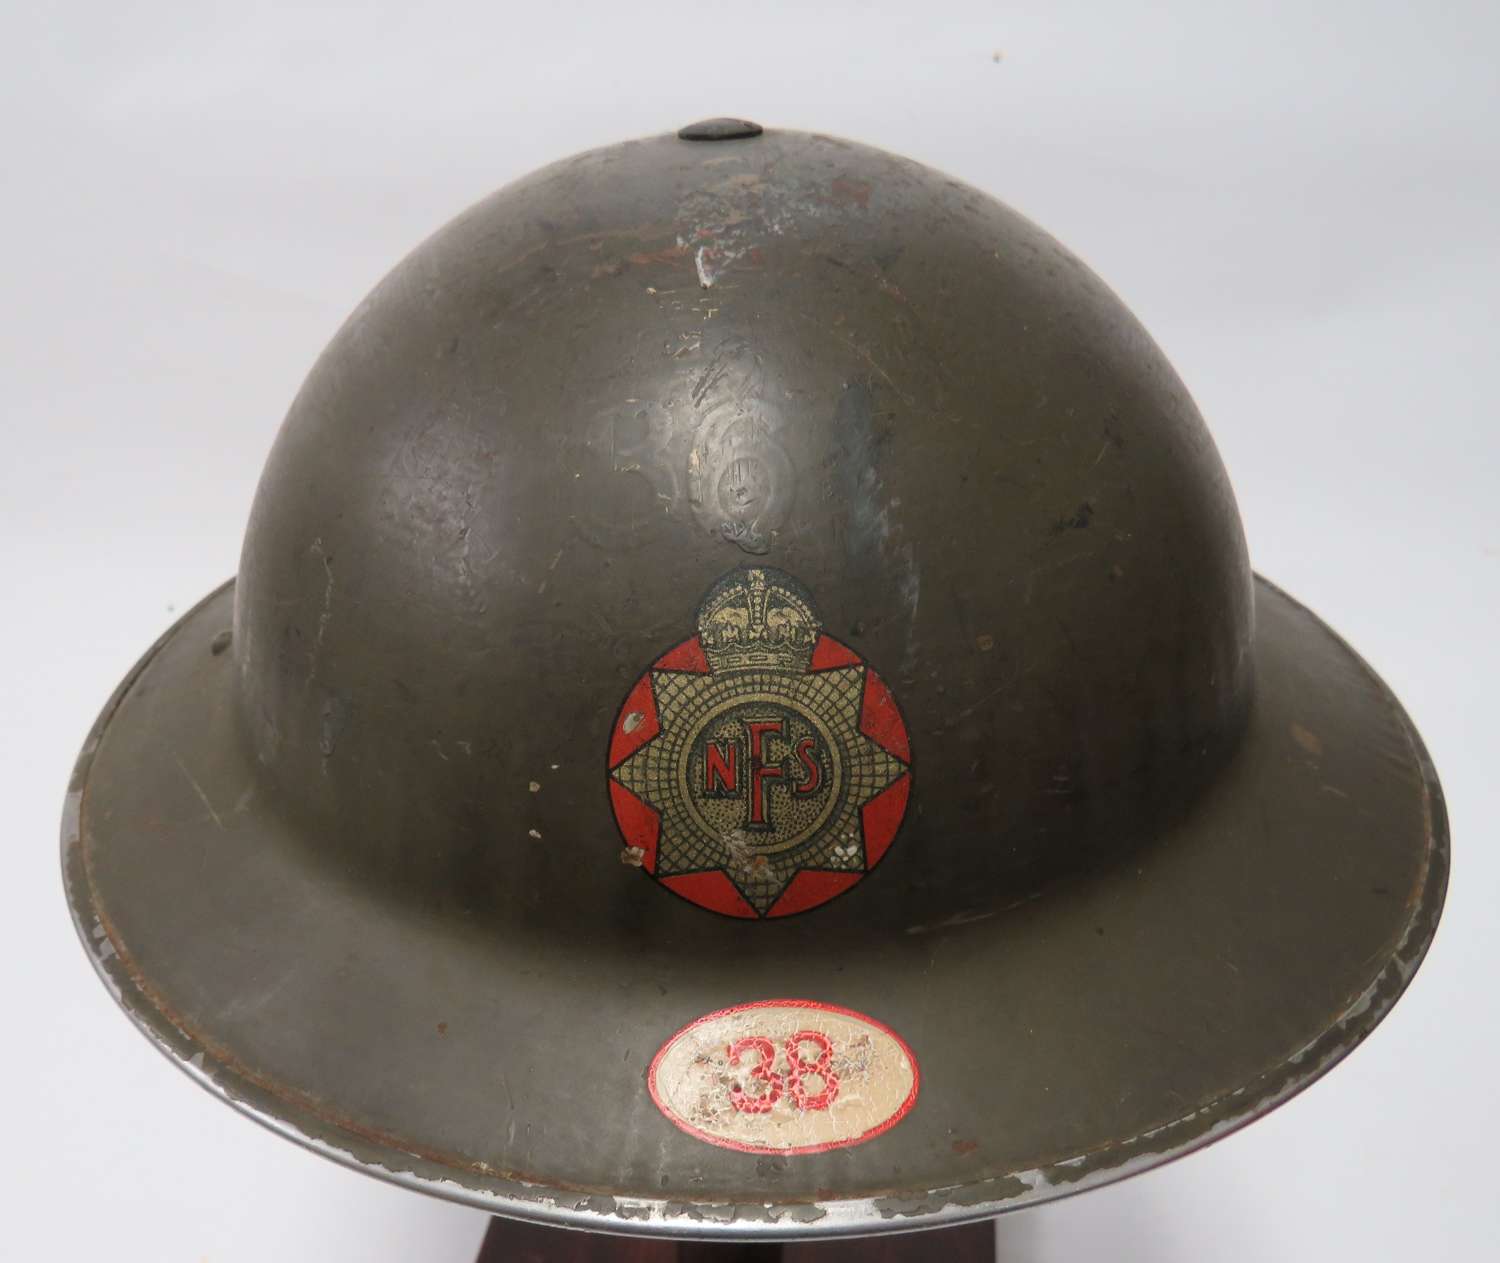 Rare 1939 Dated N.F.S Helmet with Earlier Ghost Fire Station Marks